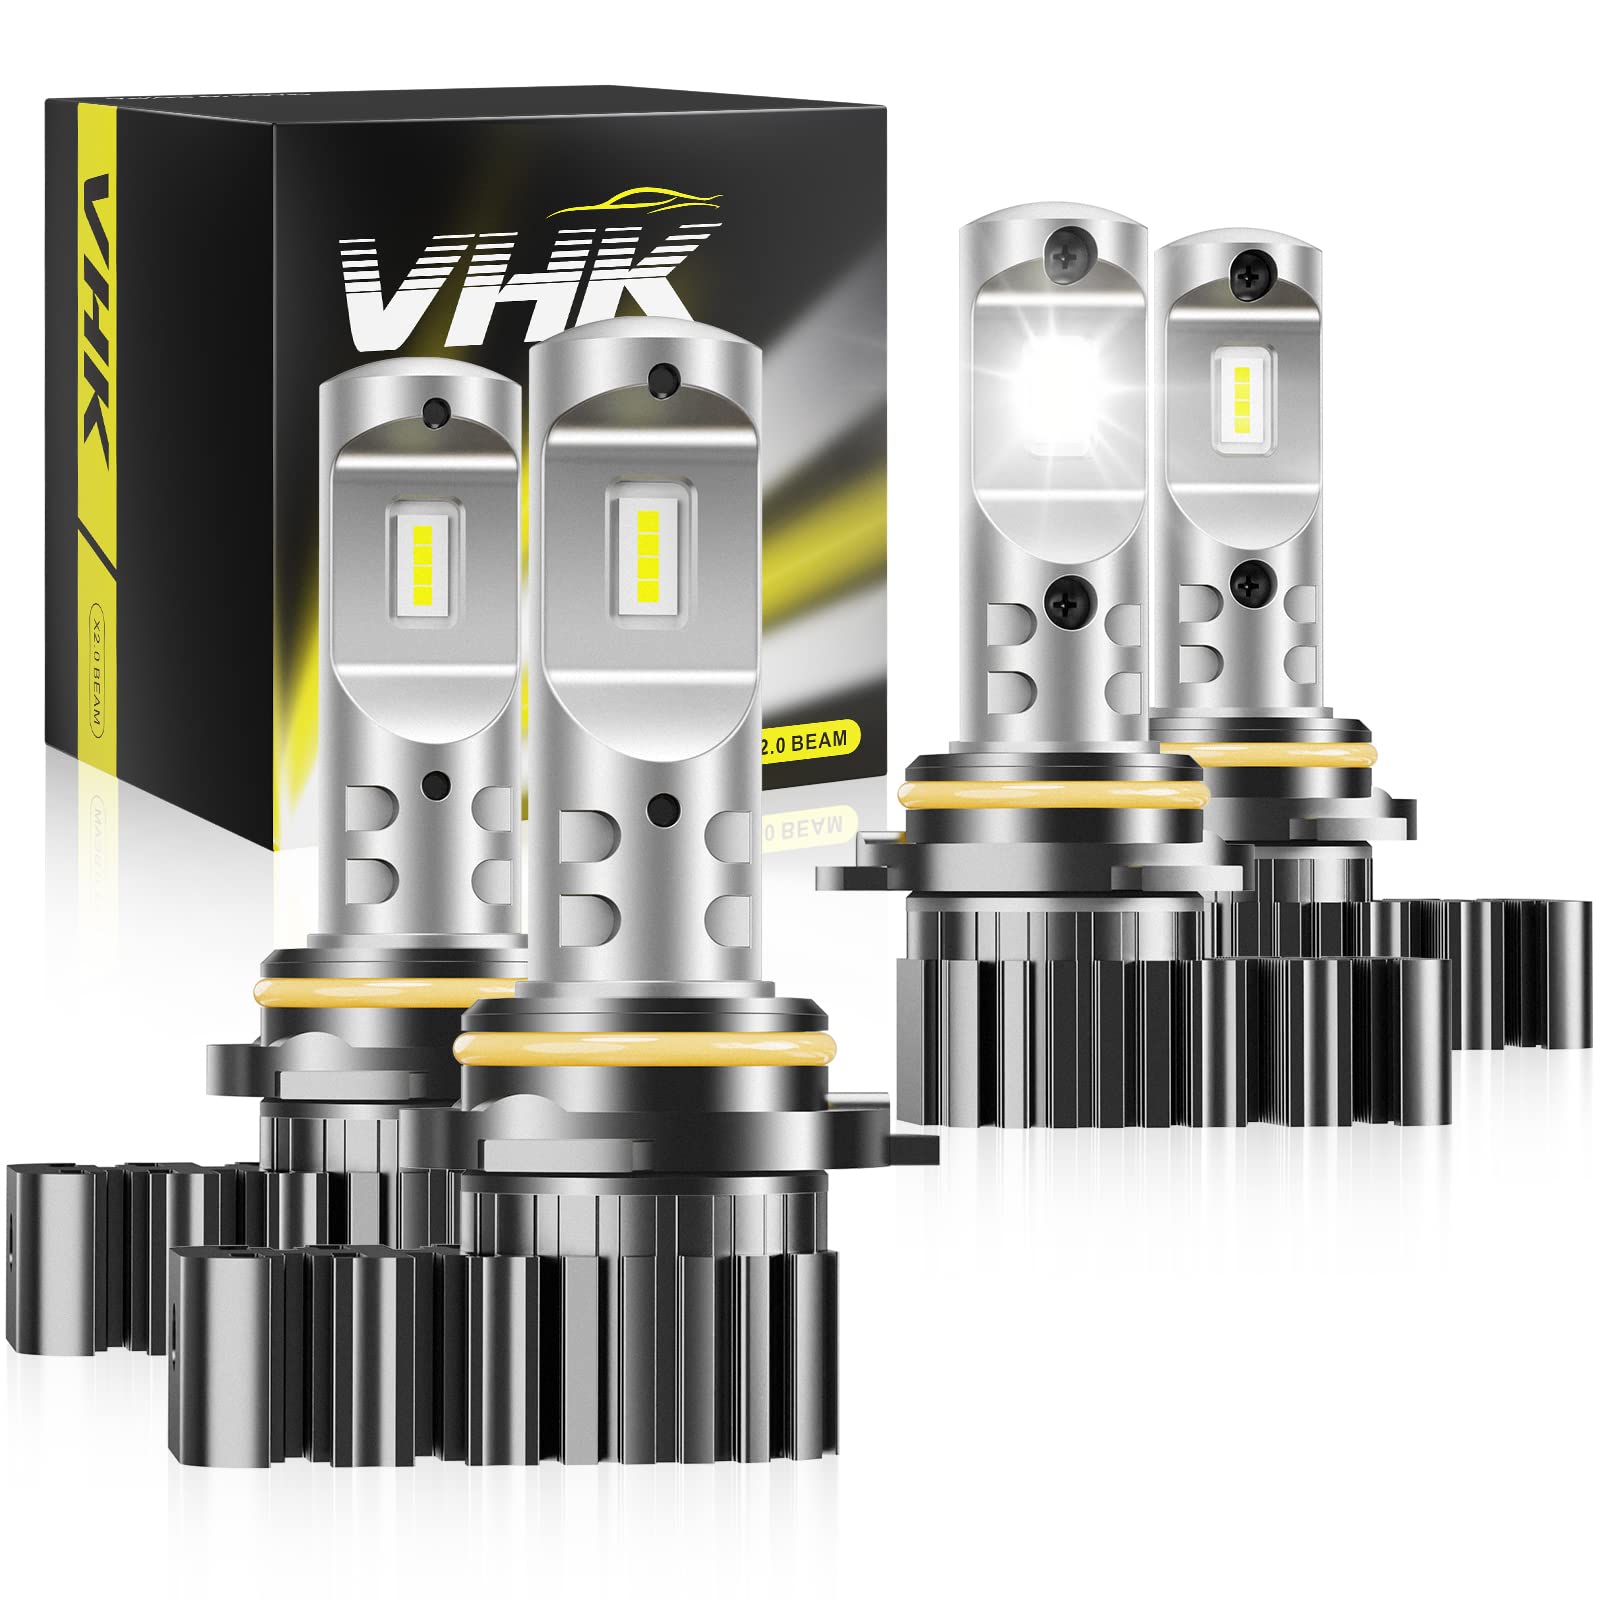 VHK for 1996-2011 2012 2013 2014 2015 2016 2017 2018 2019 2020 2021 Chevy Express 1500 2500 3500 Headlights LED Bulbs Low